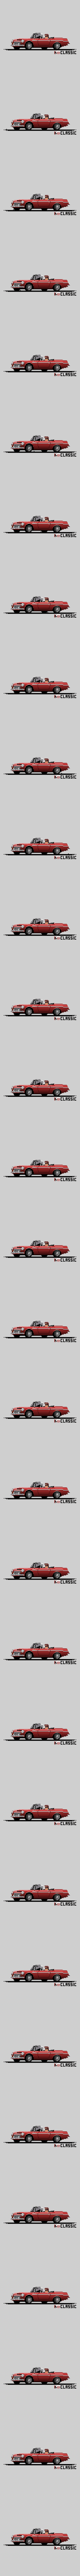 CryptoWhips JDM Classics collection image